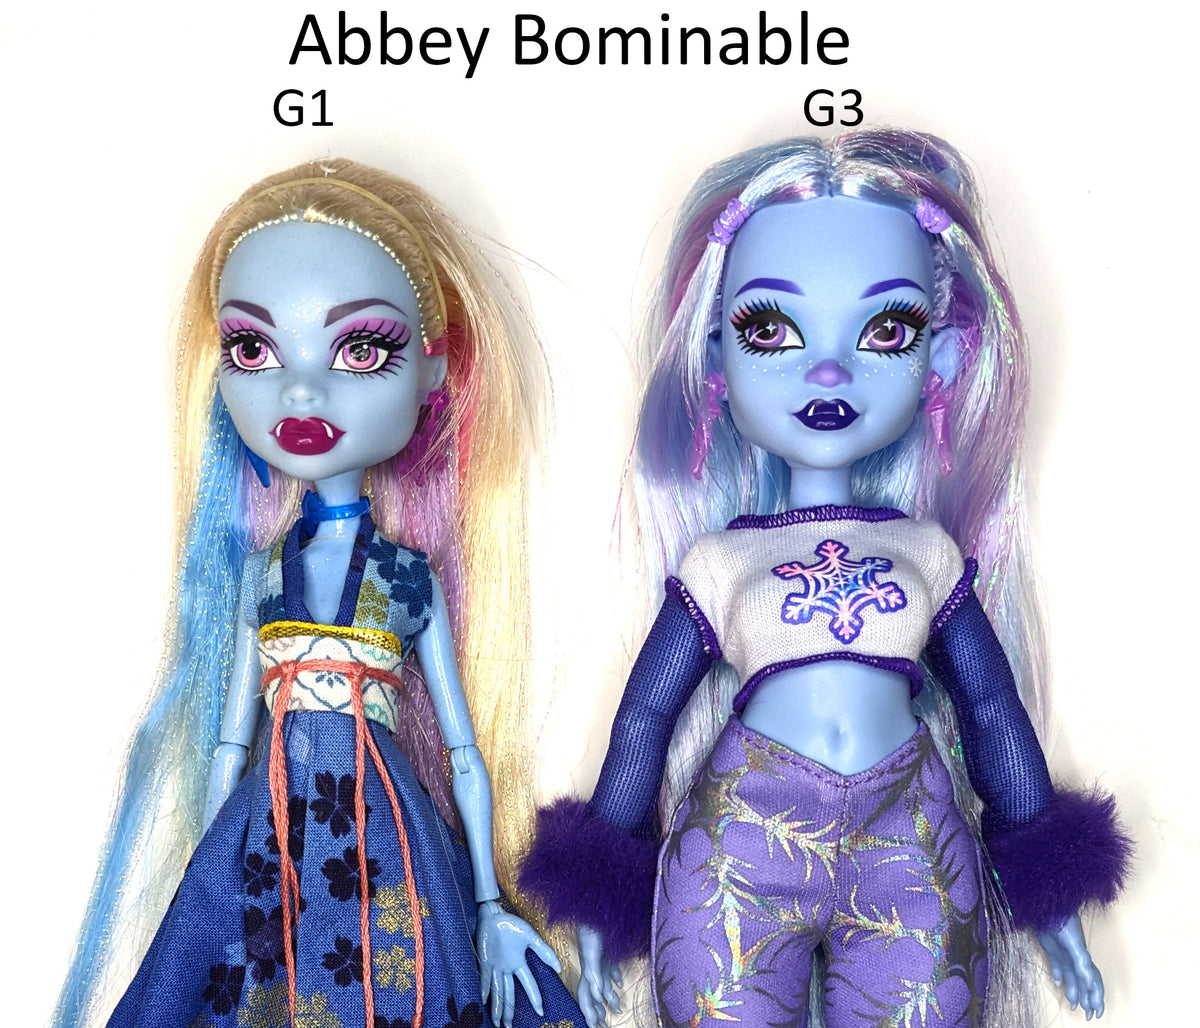 The new G3 Abbey Bominable review, sizing, & comparisons Requiem Art